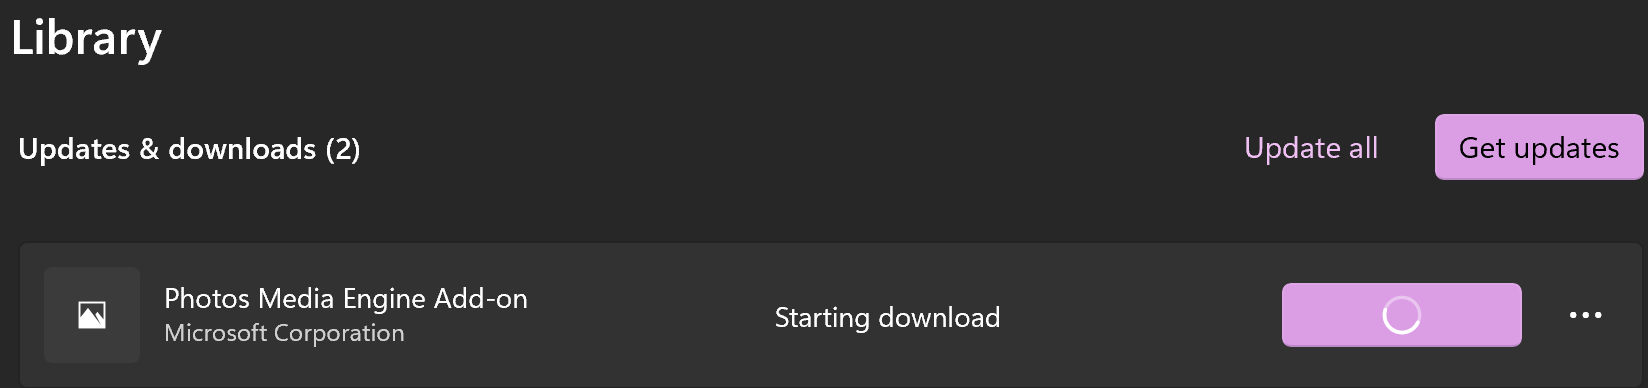 My Download Is Stuck! Help! - General Discussion - Microsoft